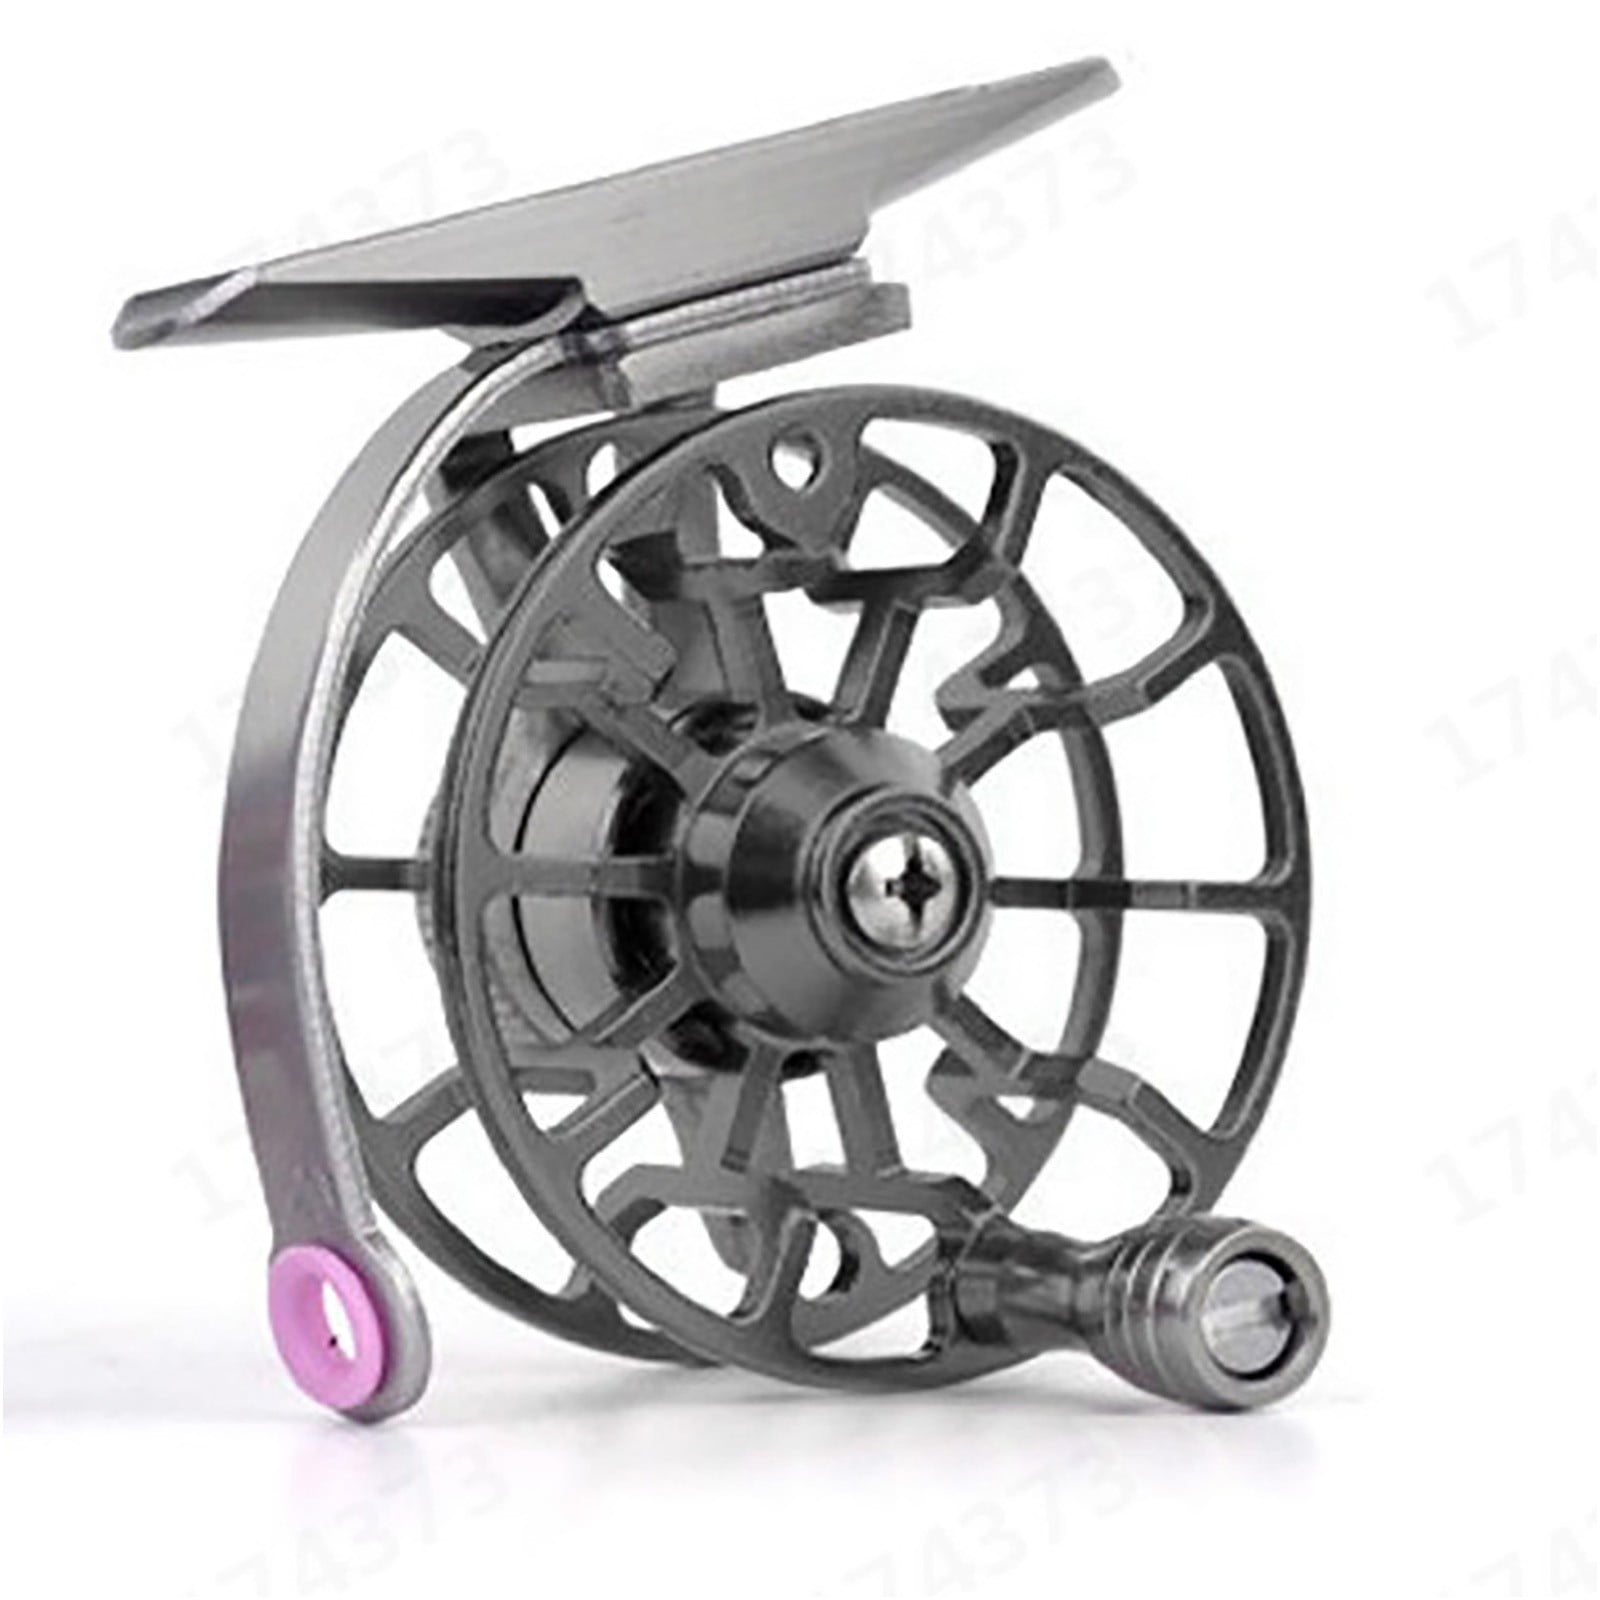 Kayannuo Christmas Clearance Items Aluminum Fly Fishing Reel Diameter 55mm  Size Right or Left Hand Retrieve 